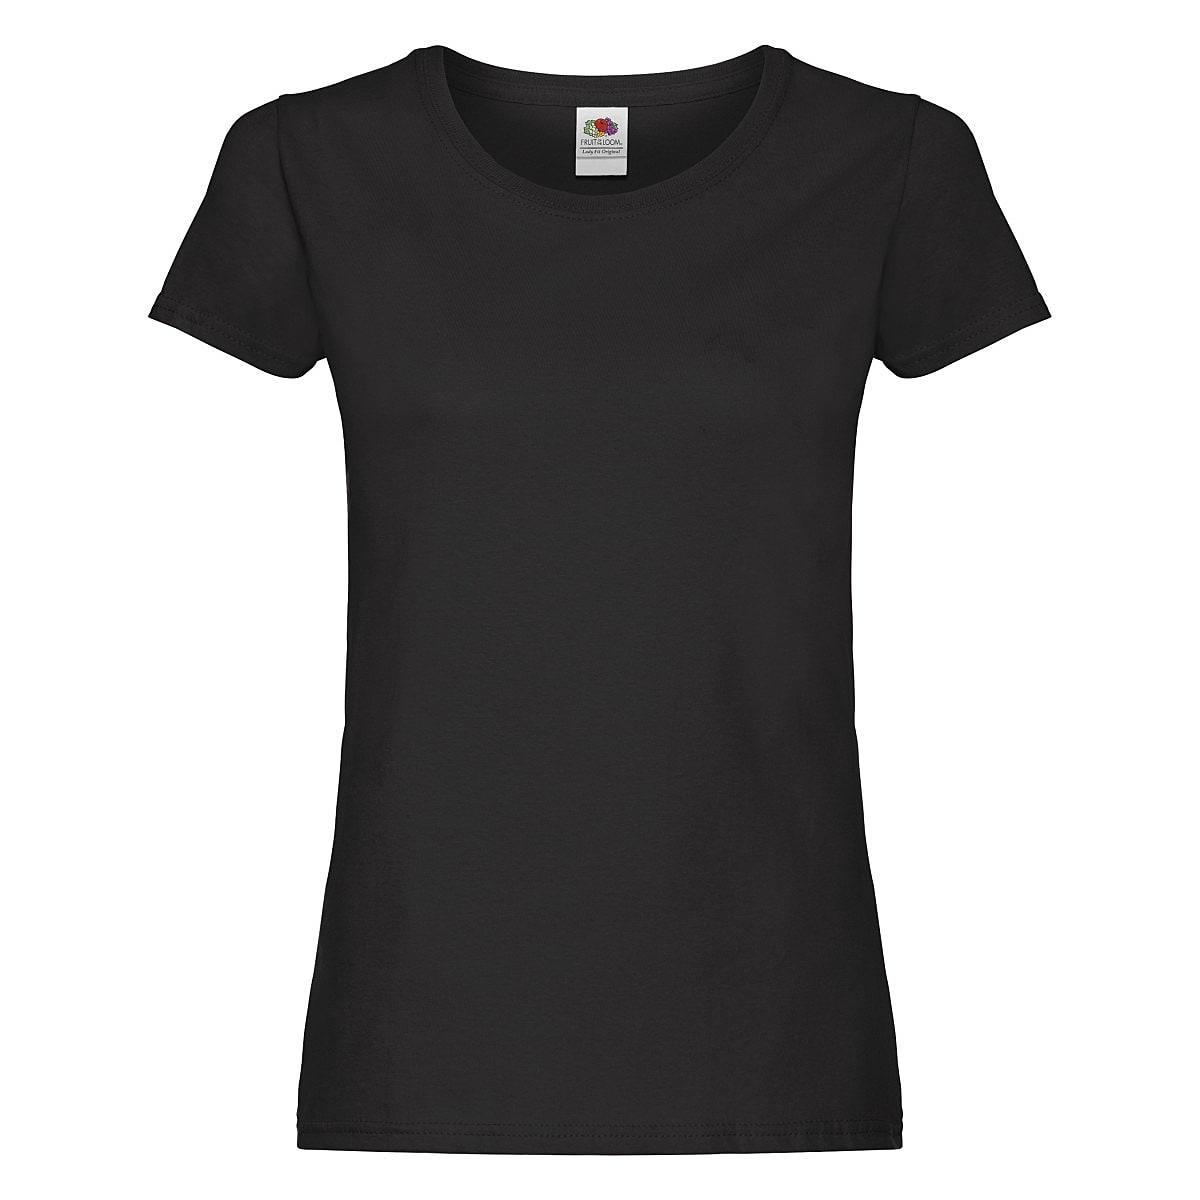 Fruit Of The Loom Lady Fit Original T-Shirt in Black (Product Code: 61420)